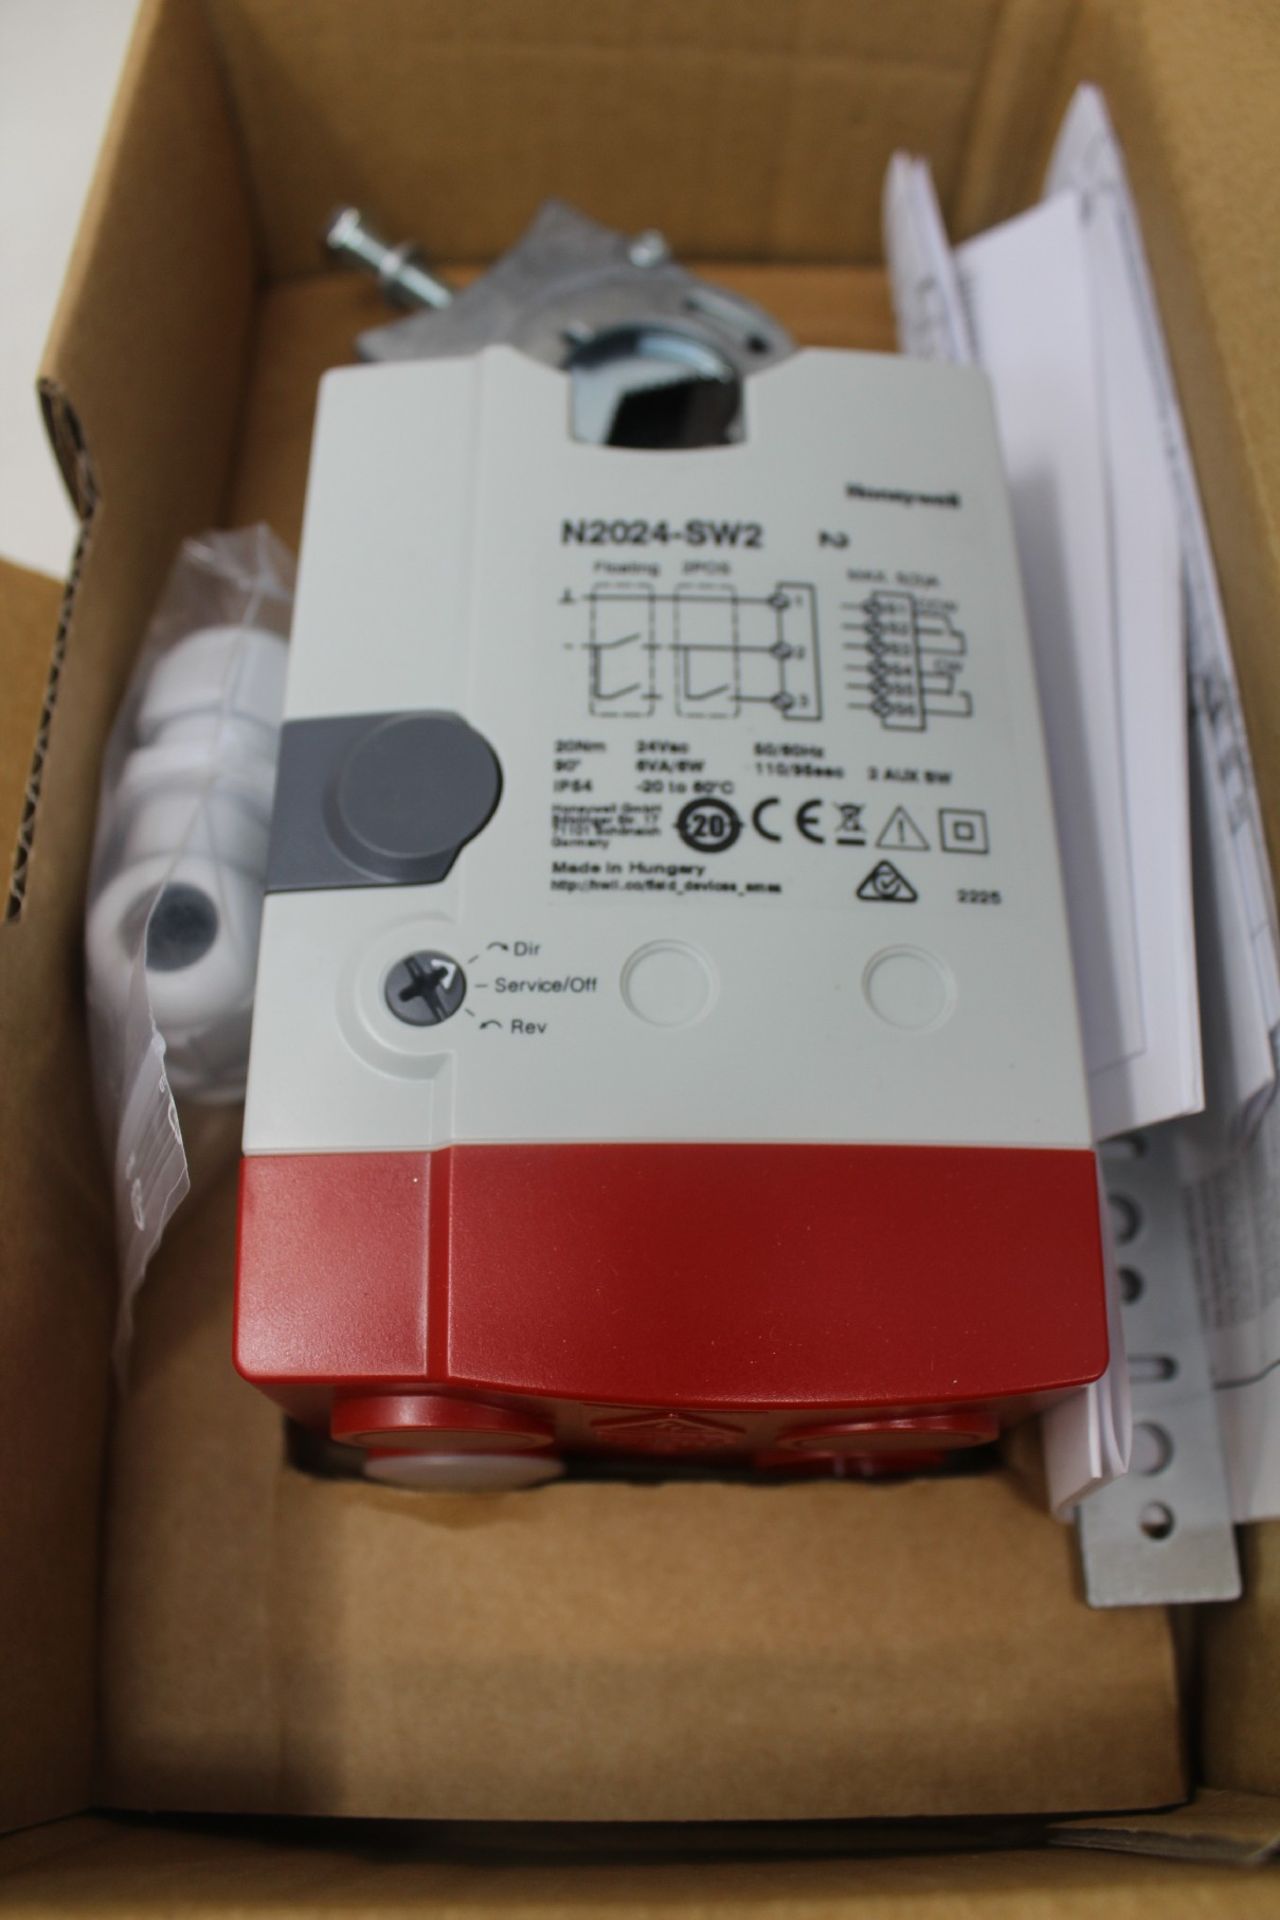 A boxed as new Honeywell SmartAct Damper Actuator, 20Nm, 24Vac, 6VA, IP54 (REF: N2024-SW2).